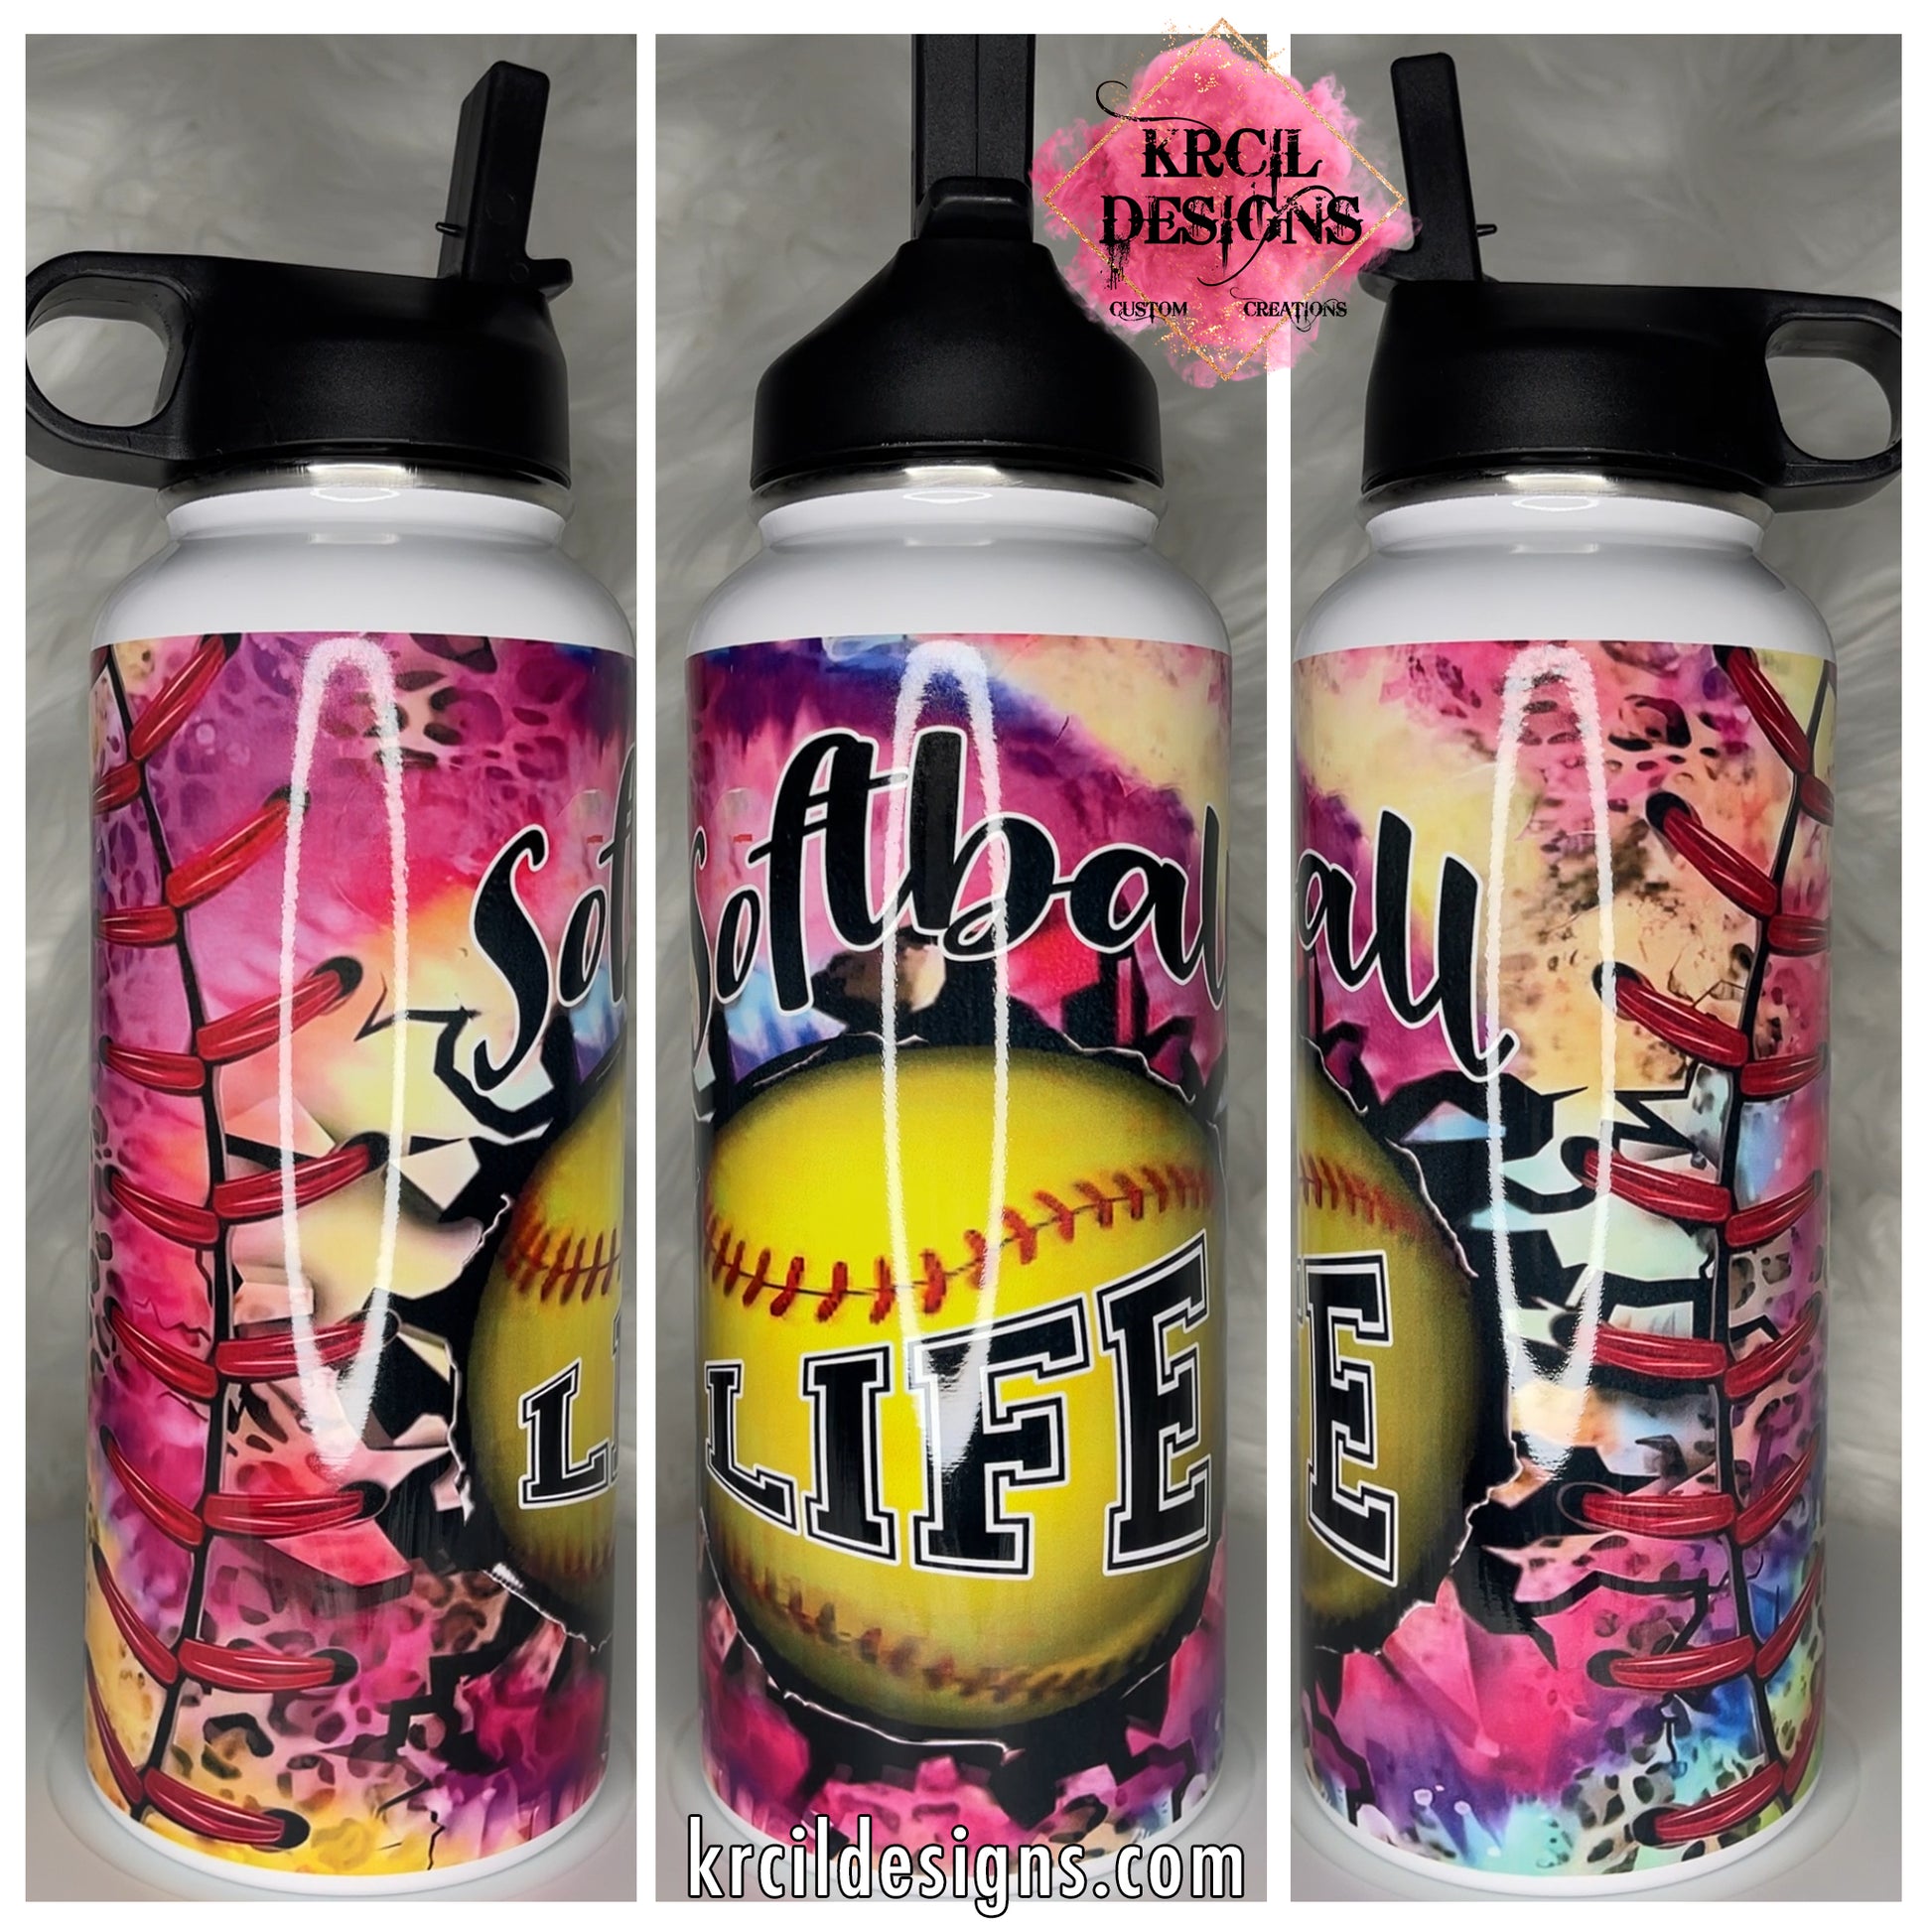 Cheetah' Insulated Stainless Steel Water Bottle